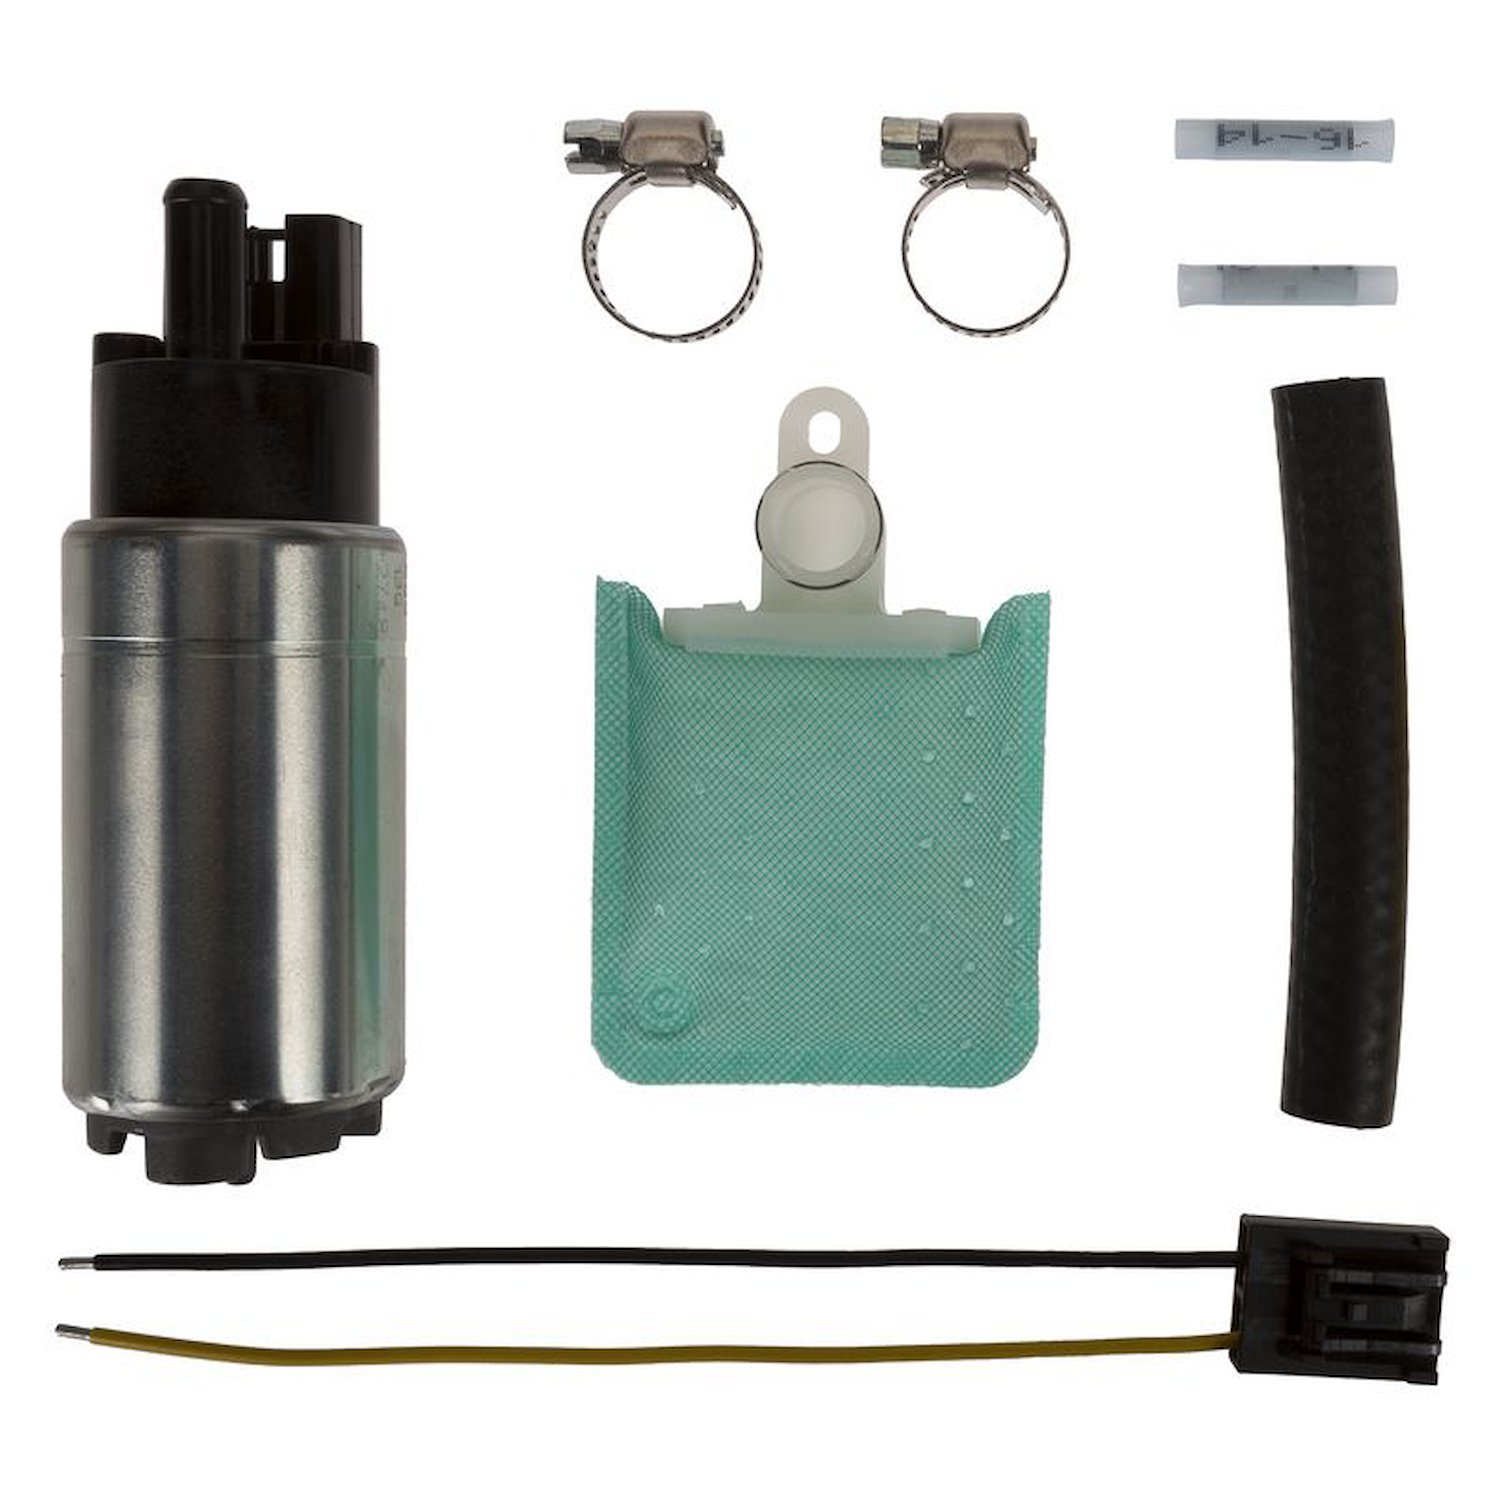 EFI In-Tank Electric Fuel Pump And Strainer Set for 1992-2005 Lexus/Toyota